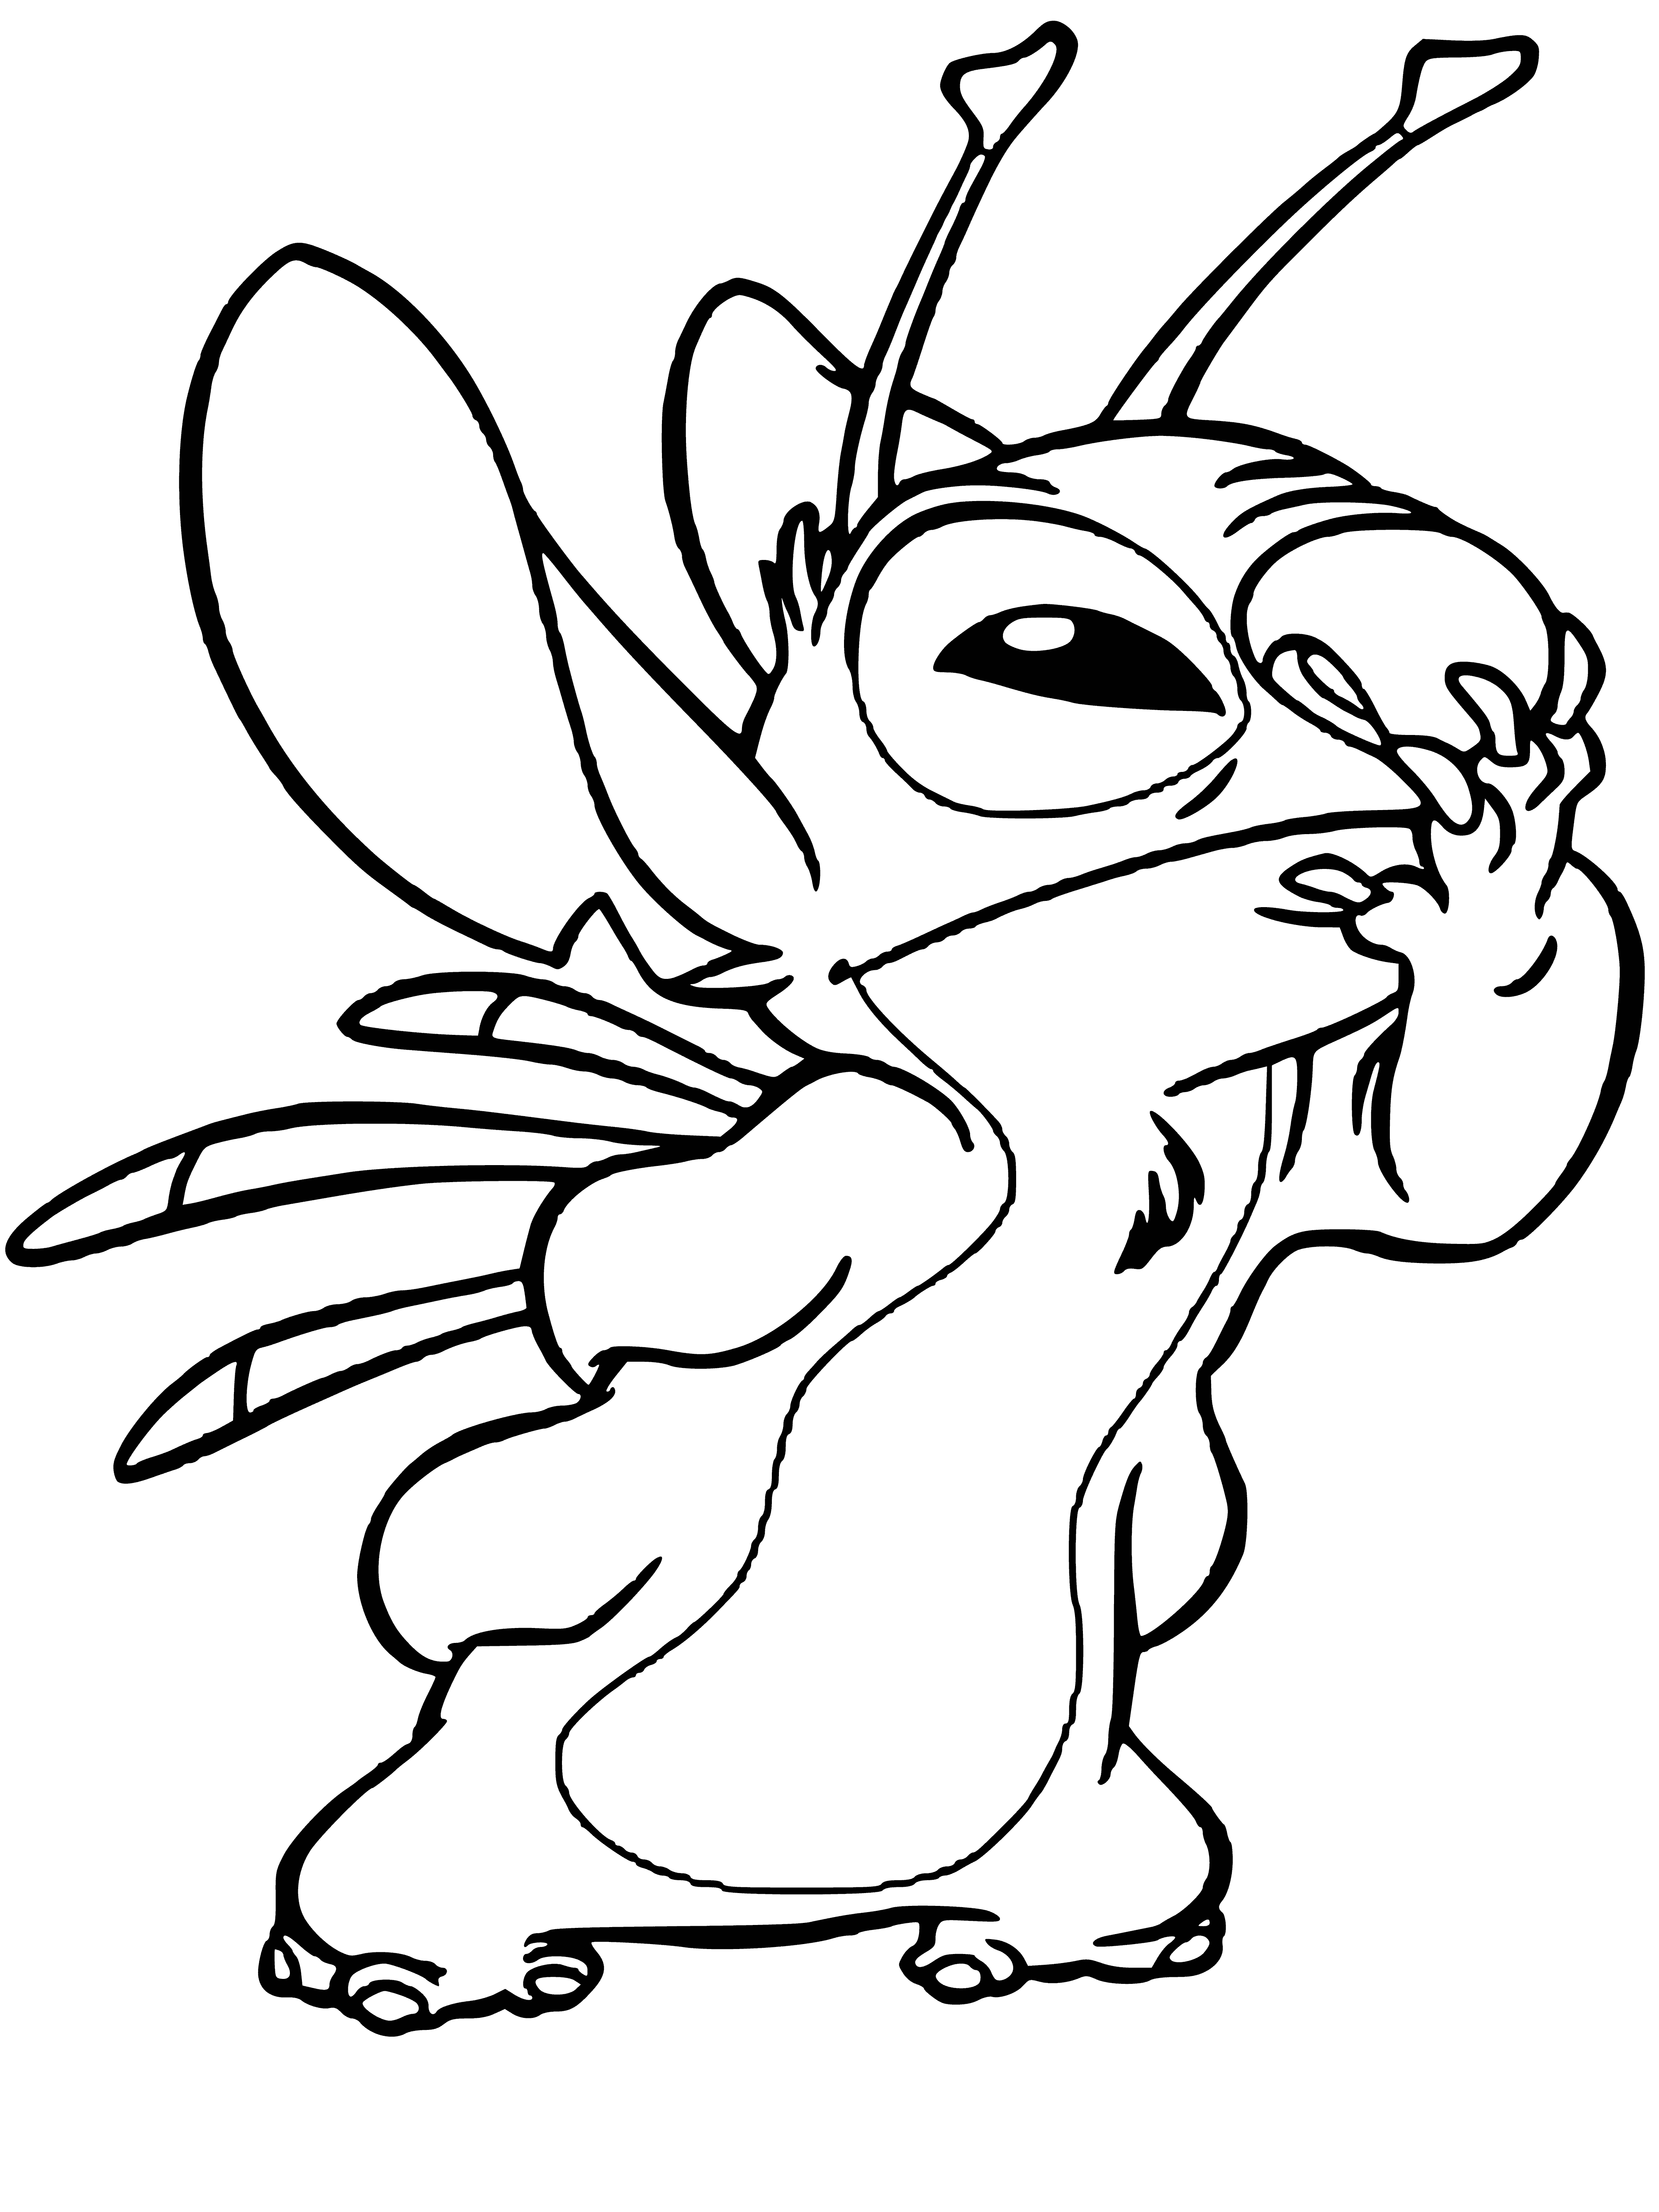 coloring page: Coloring page of Lilo & Stitch with words "Please contact us for a friend" on blue background with white spiral. #colorlove #LiloStitch #Disney